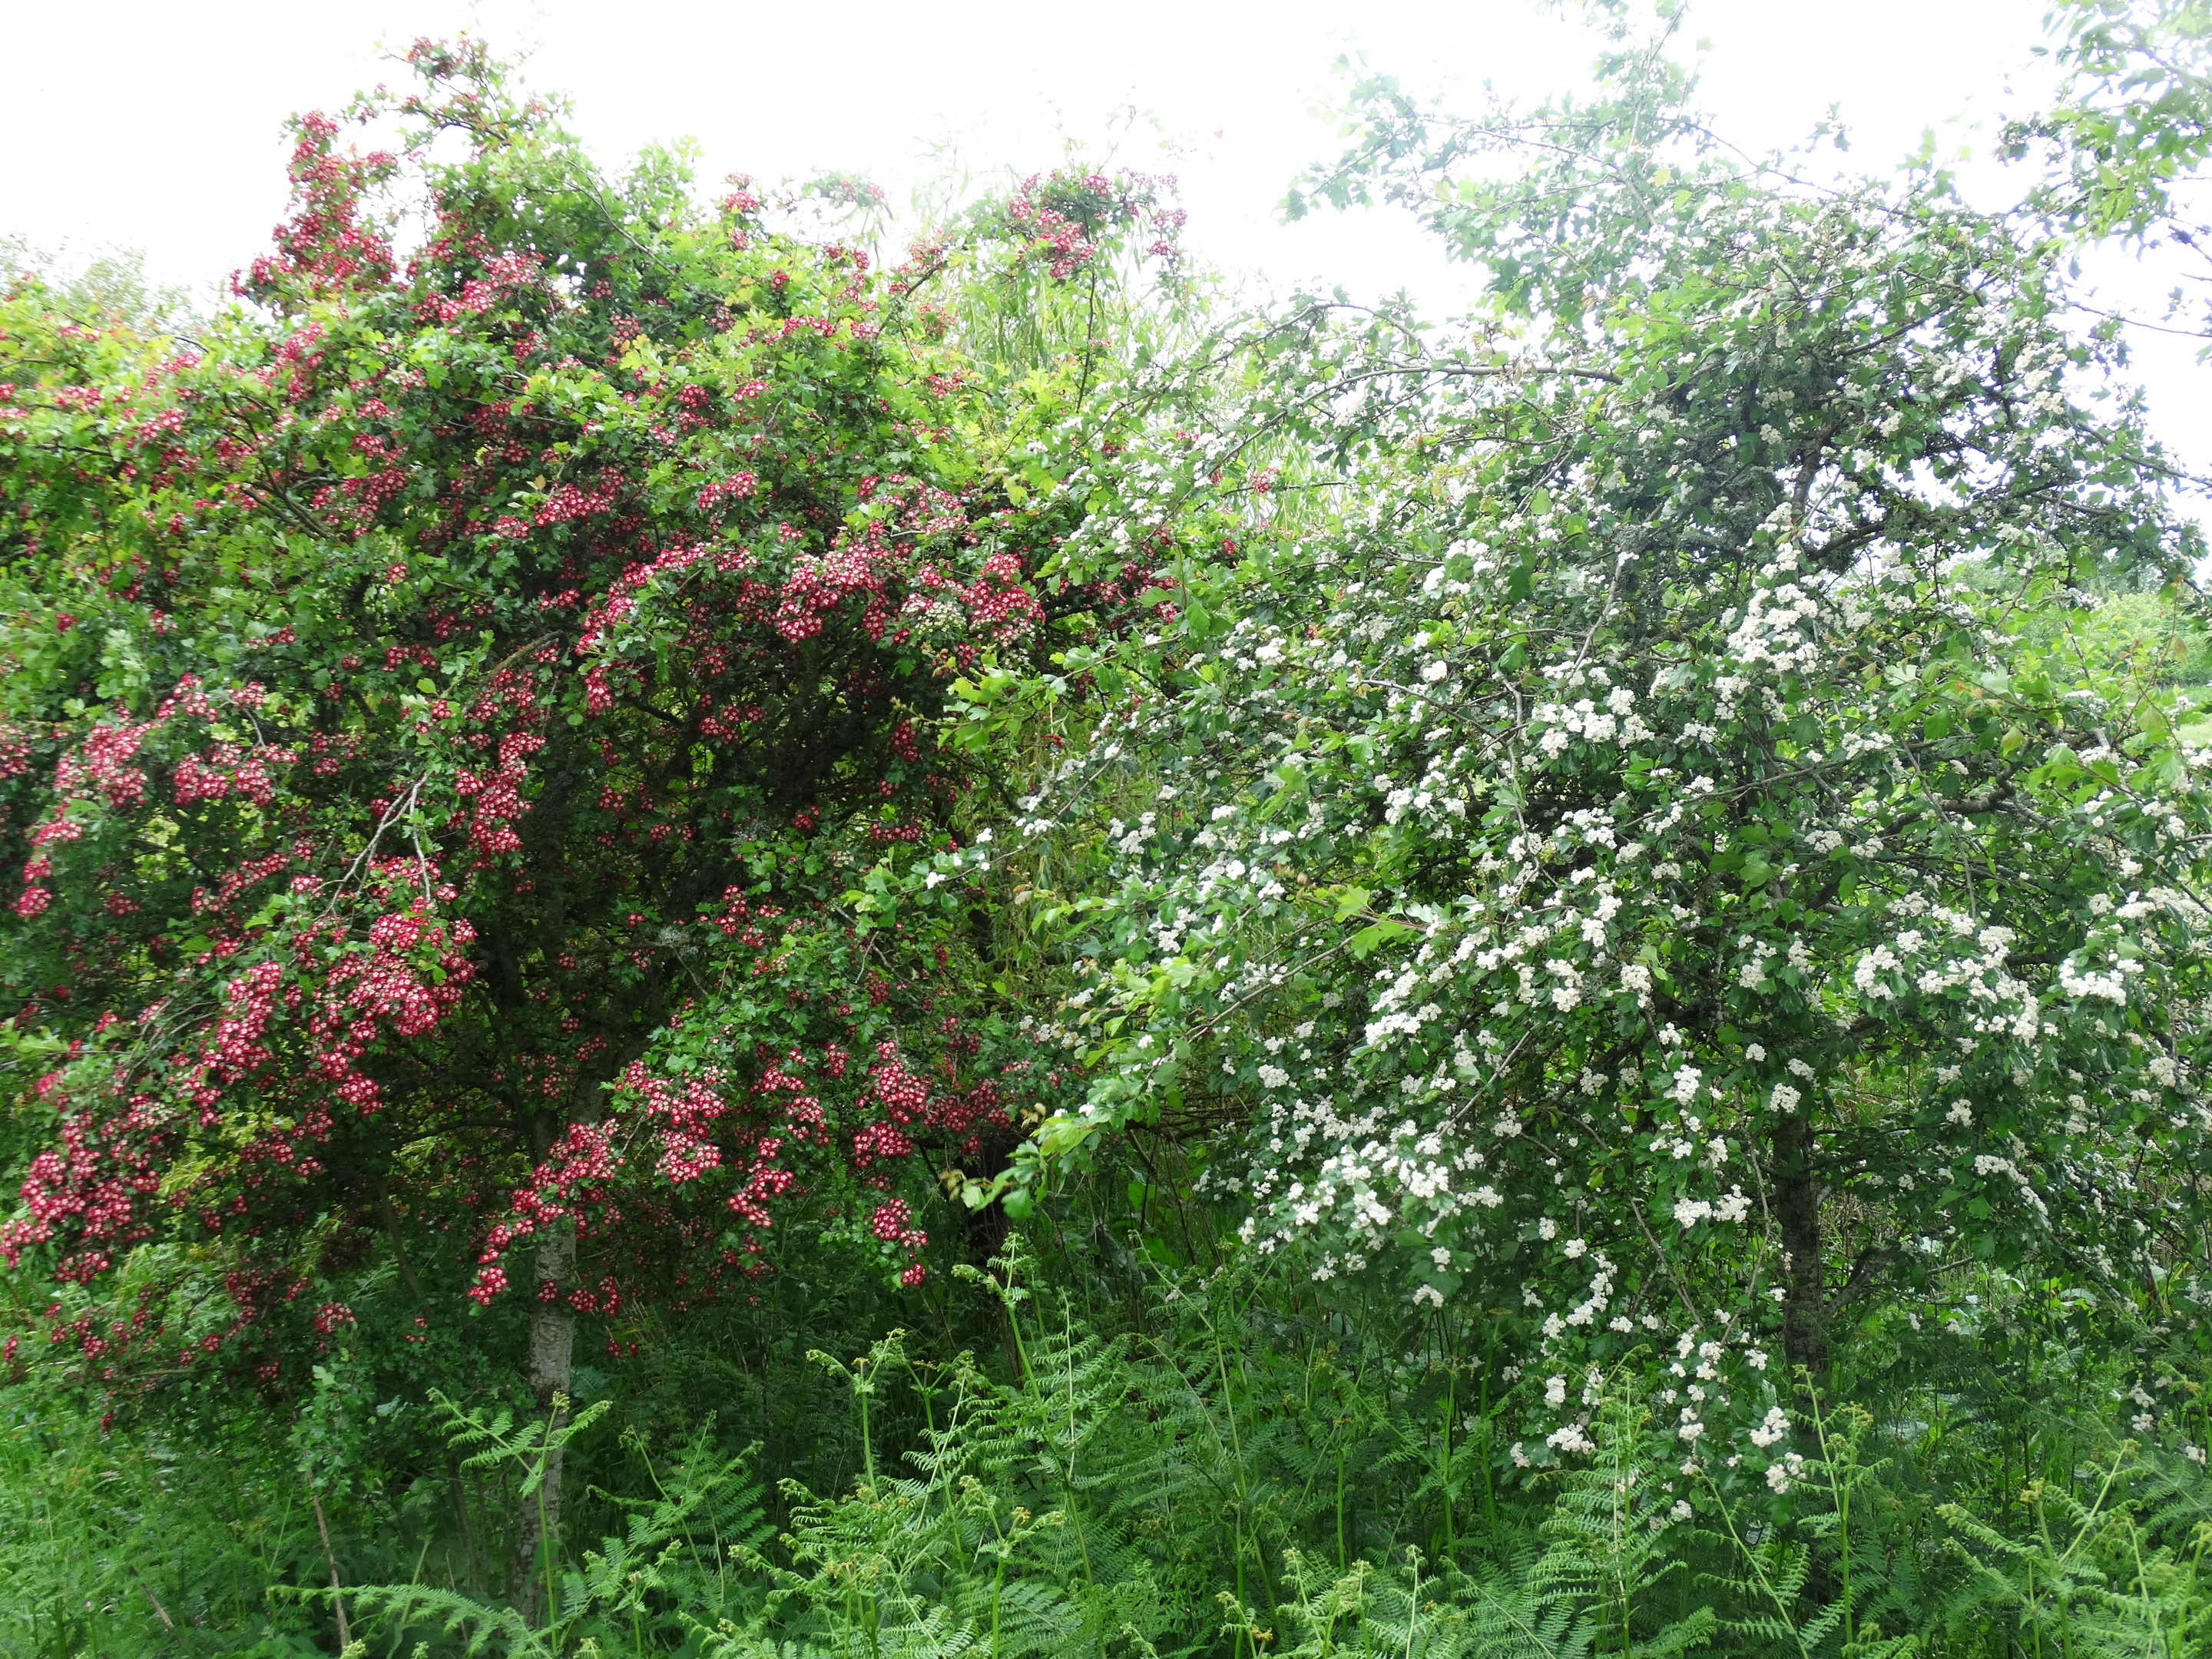 Pink and white hawthorn blossom seen on woodland margins.